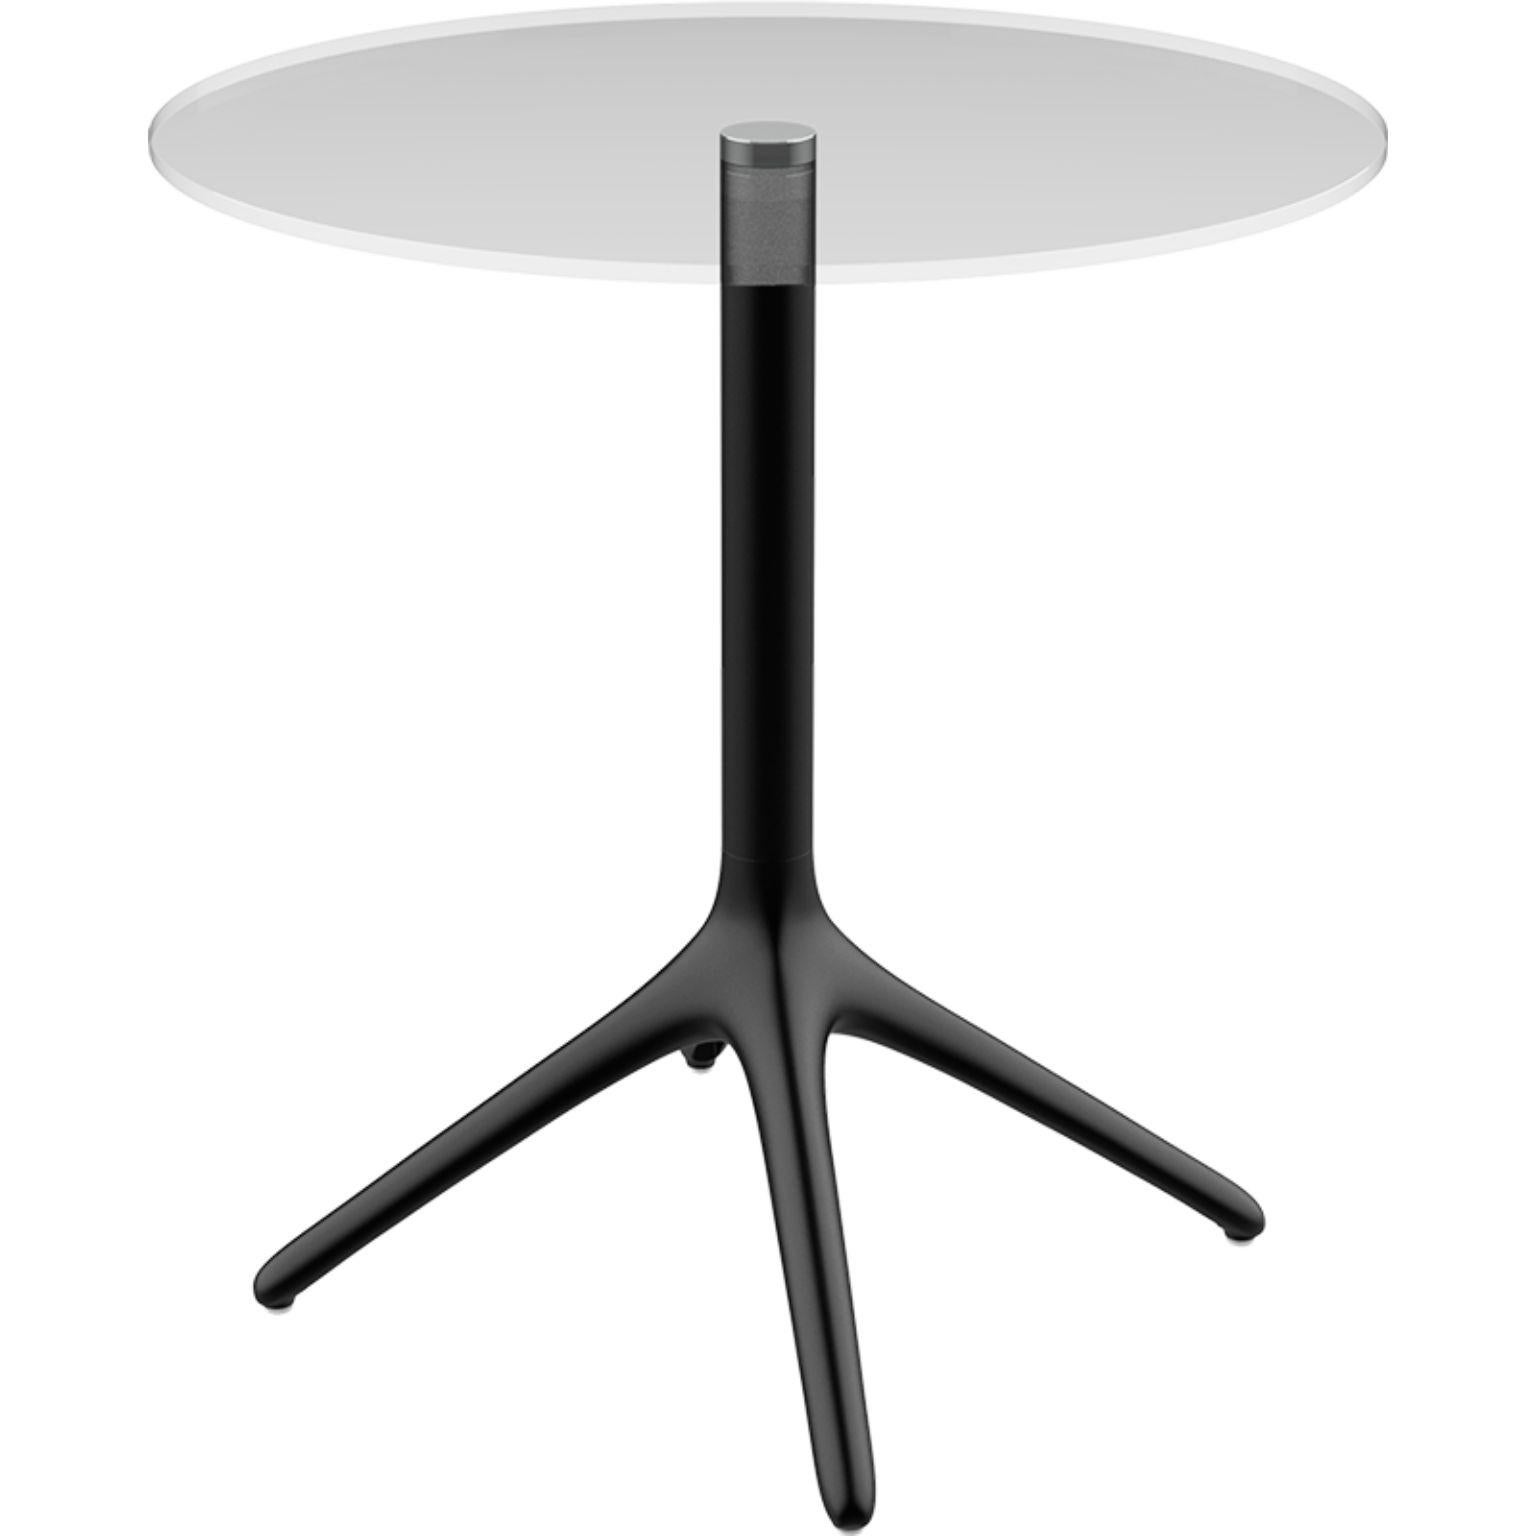 Uni black table 73 by MOWEE
Dimensions: D 45.5 x H 73 cm
Material: Aluminium, Tempered glass
Weight: 5.5 kg
Also available in different colours and finishes. Collapsable version available.

A table designed to be as versatile as possible and